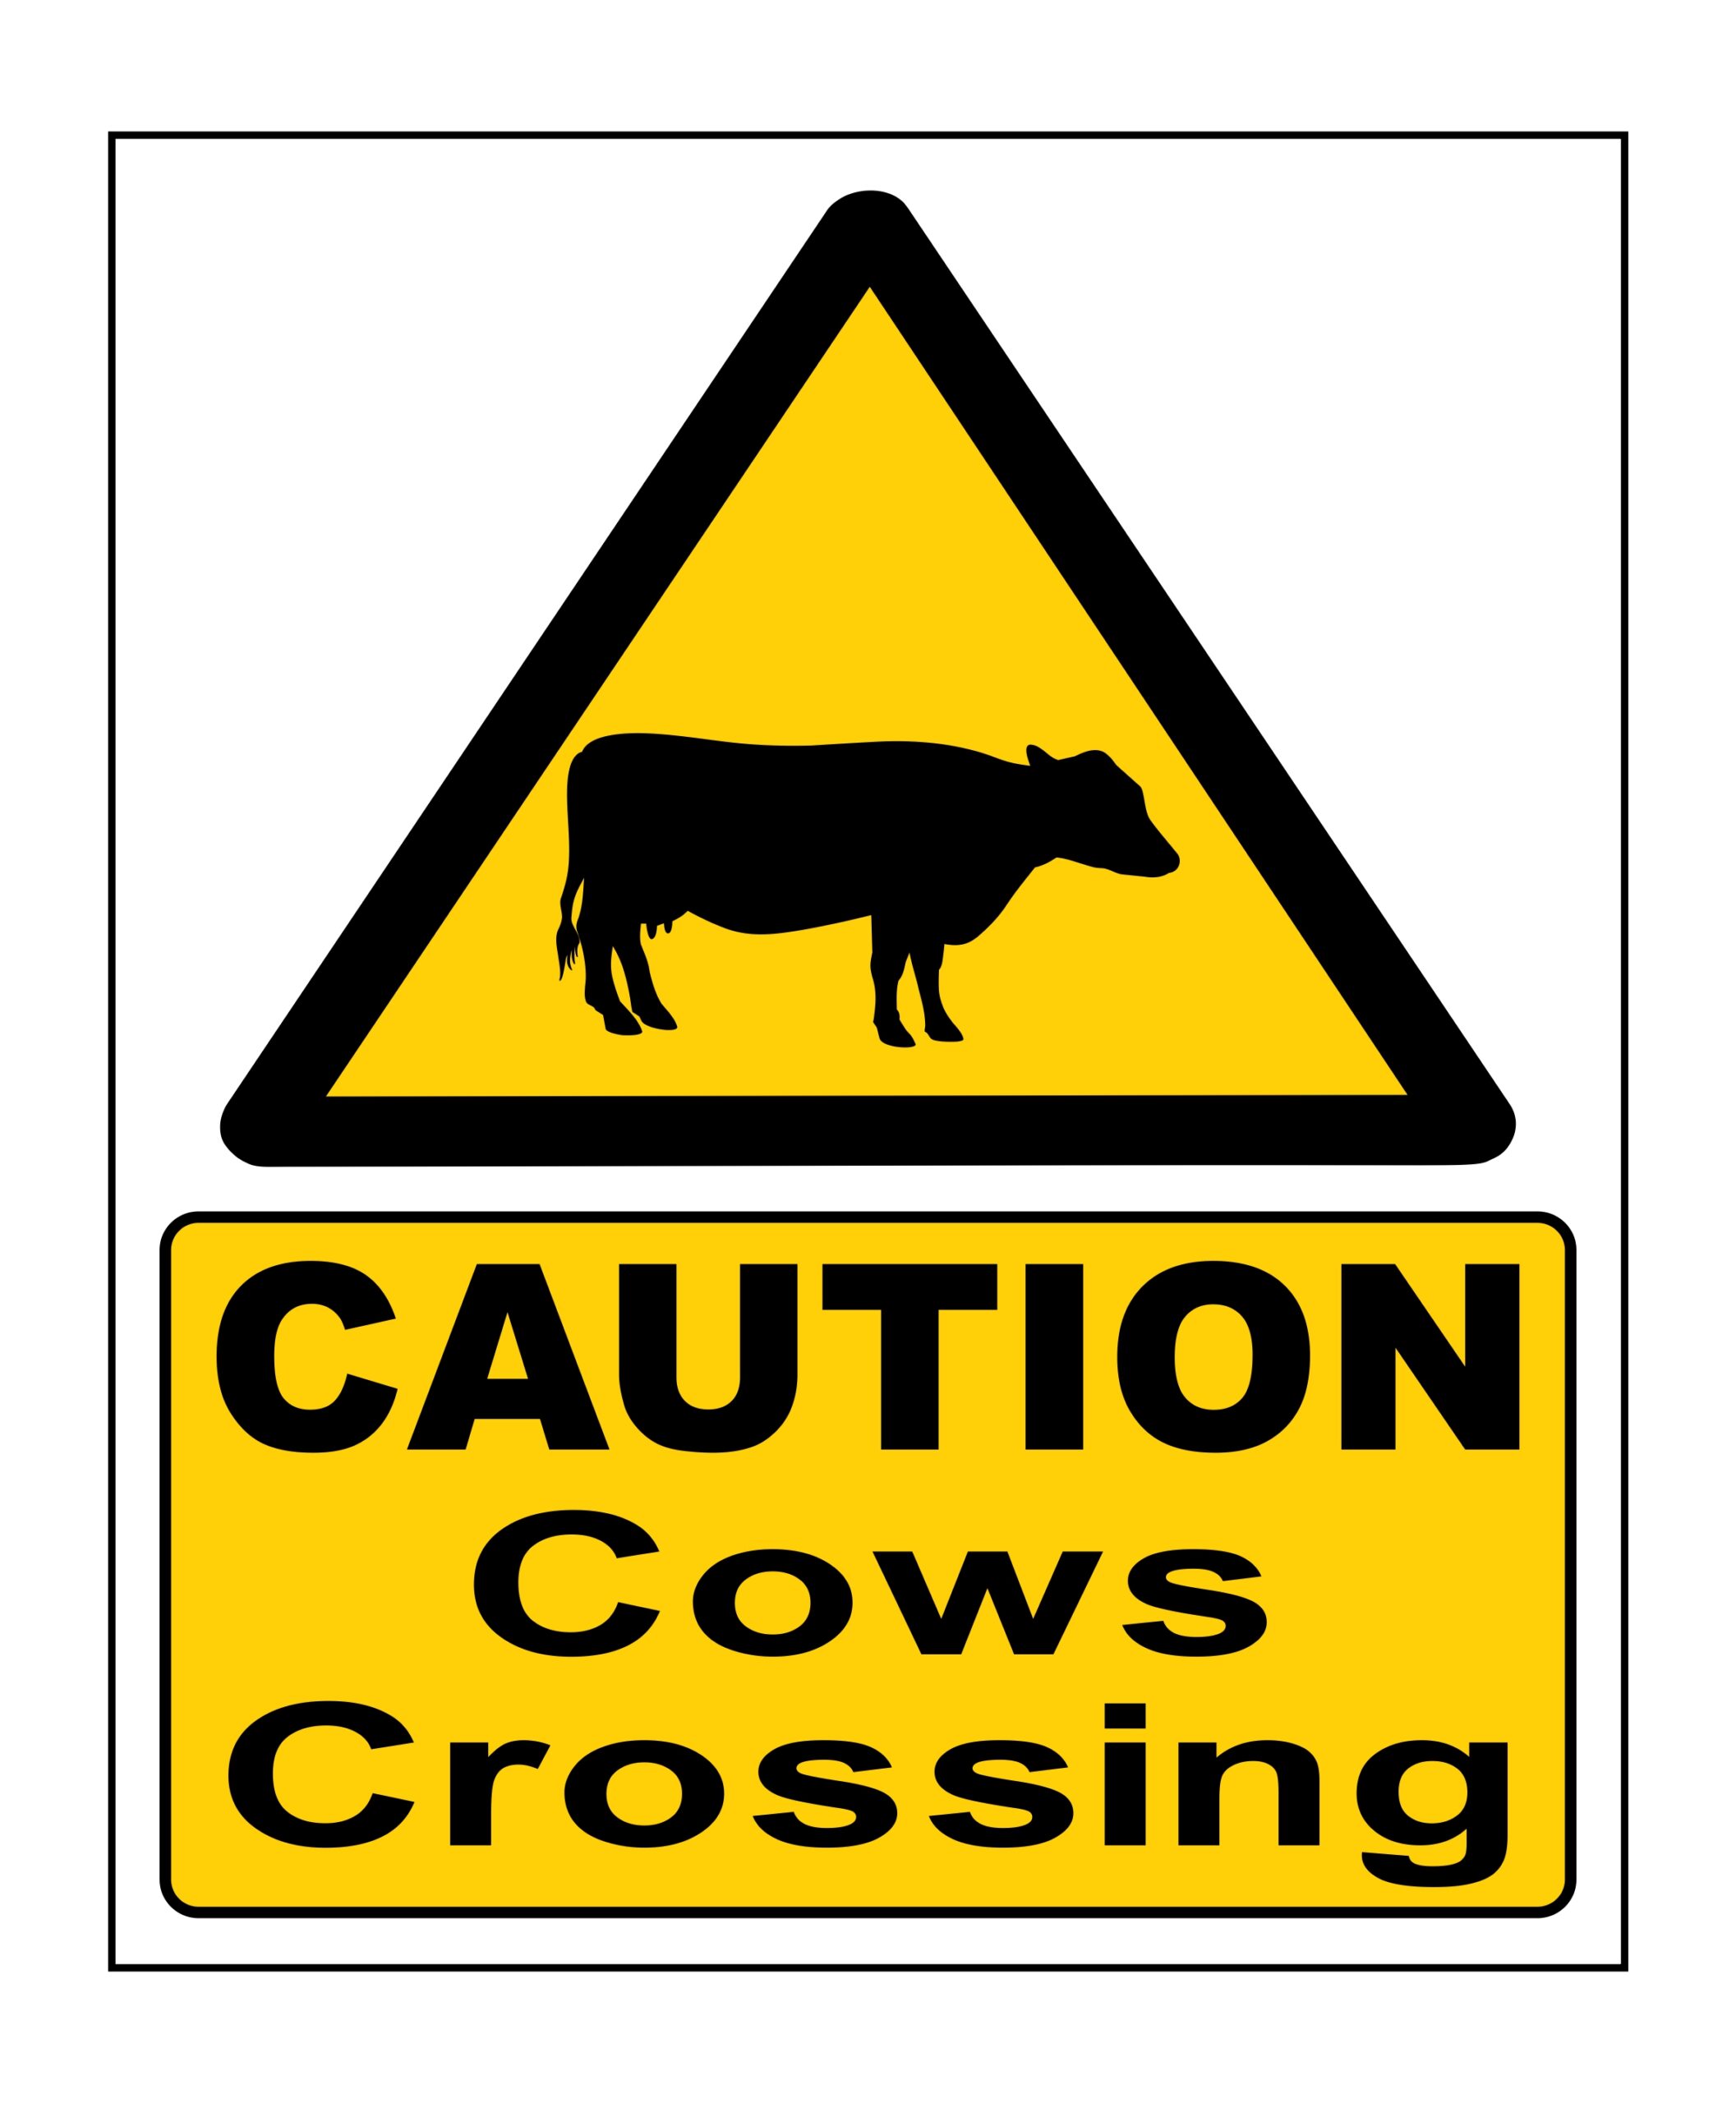 Caution Cows Crossing signage